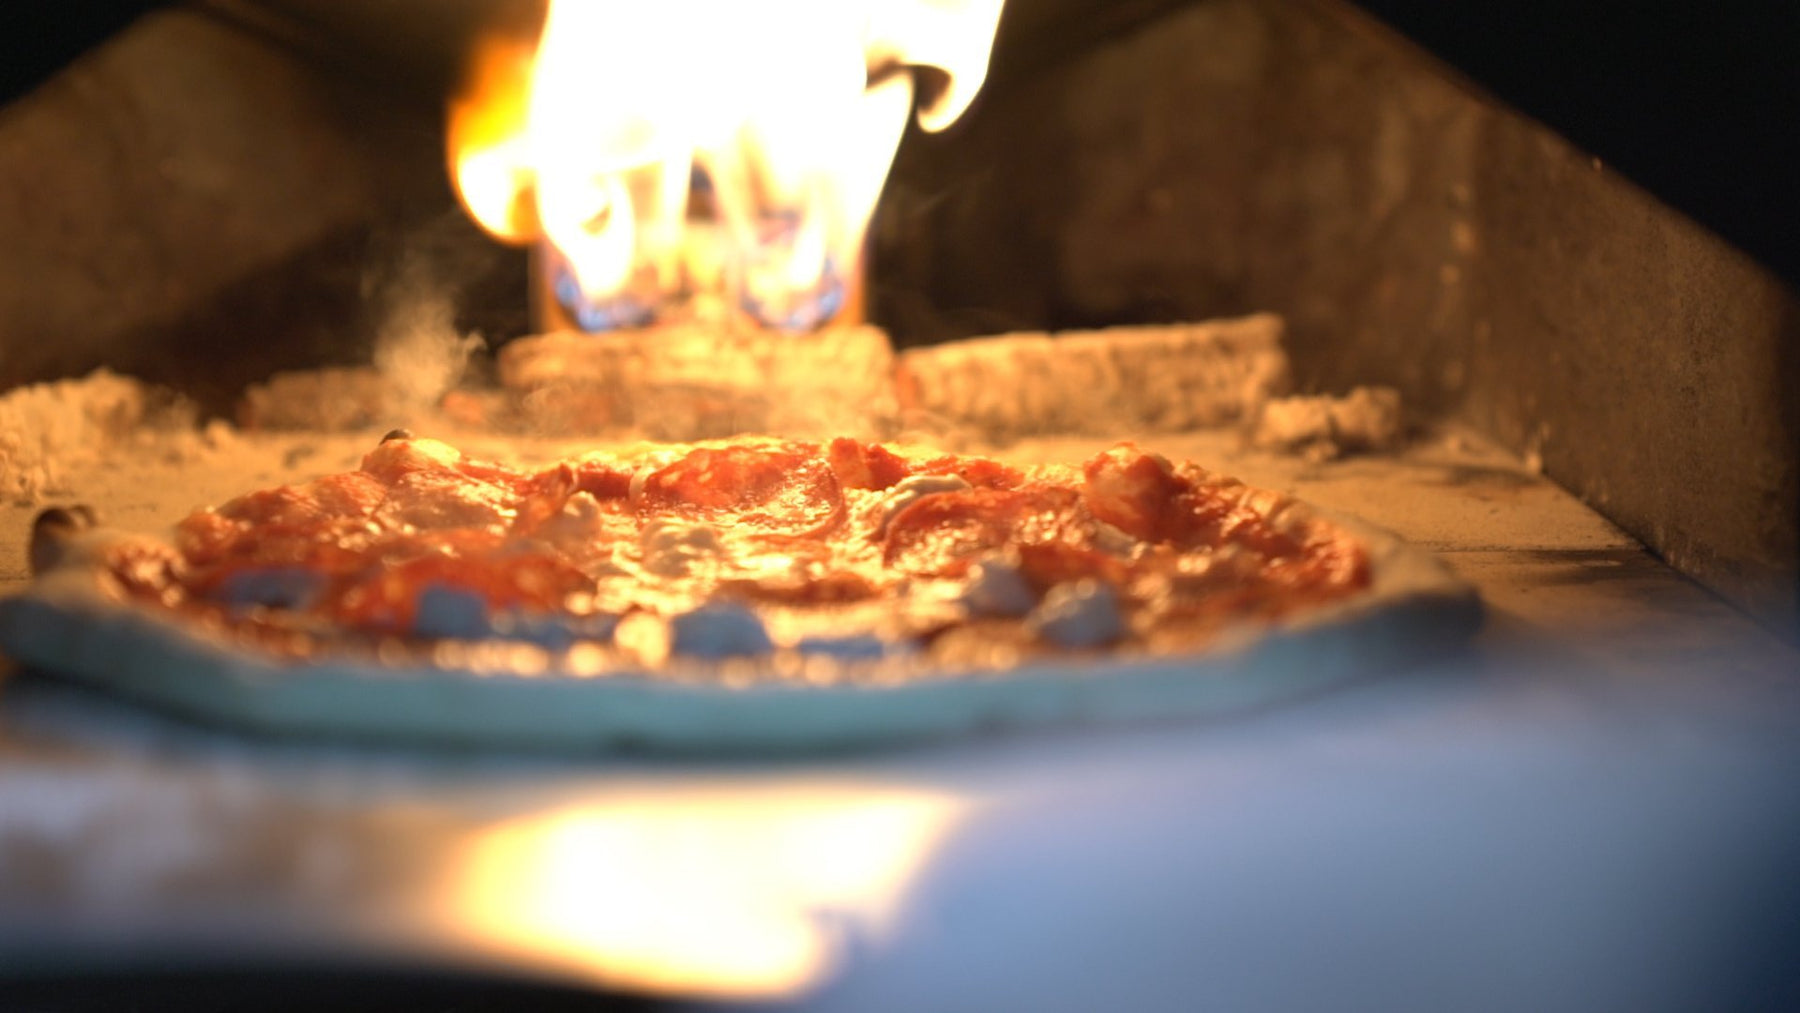 A pizza topped with haggis cooking in a pizza oven for Burns Night